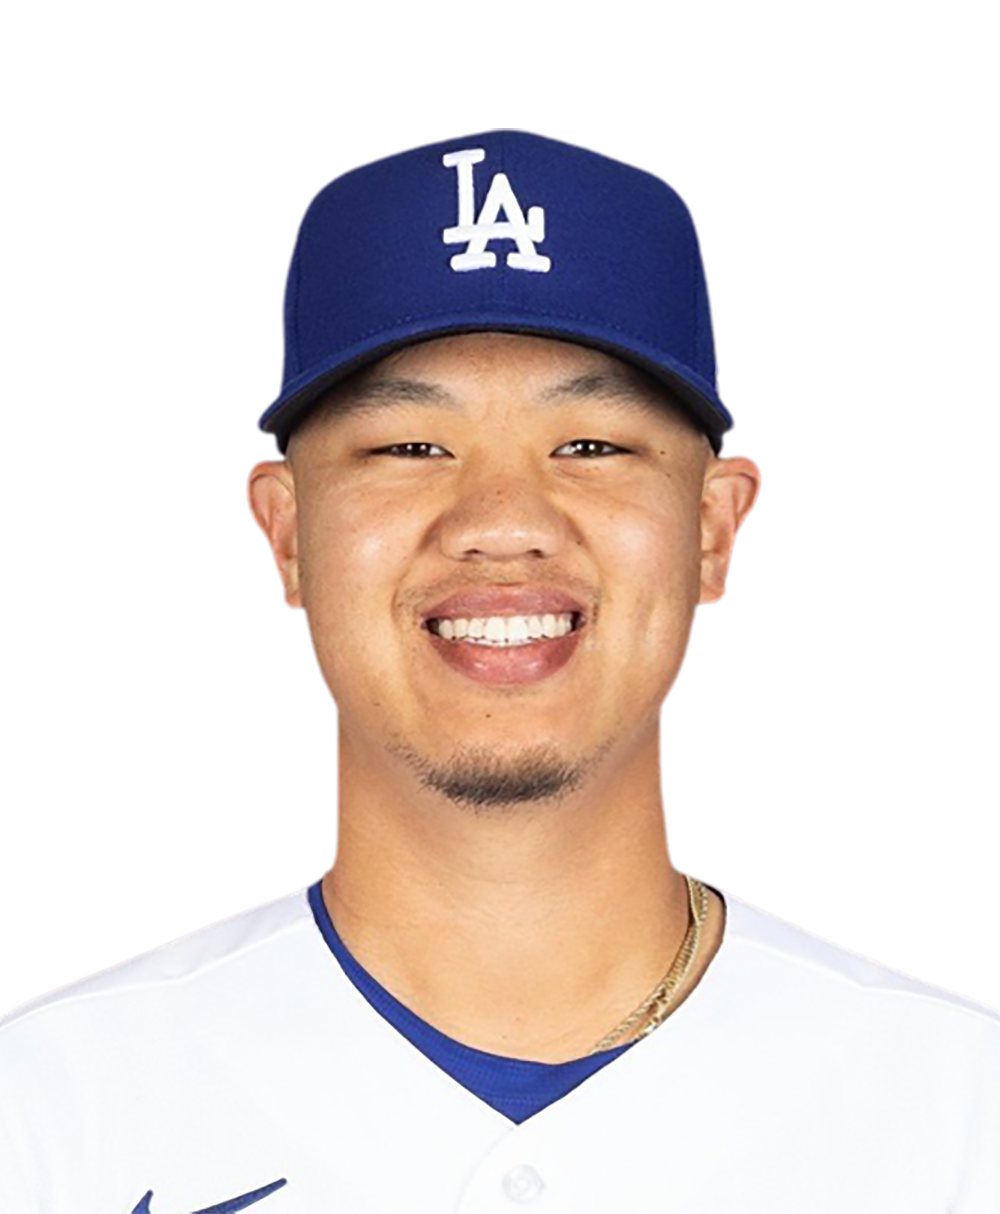 This is a 2022 photo of Jordan Yamamoto of the New York Mets